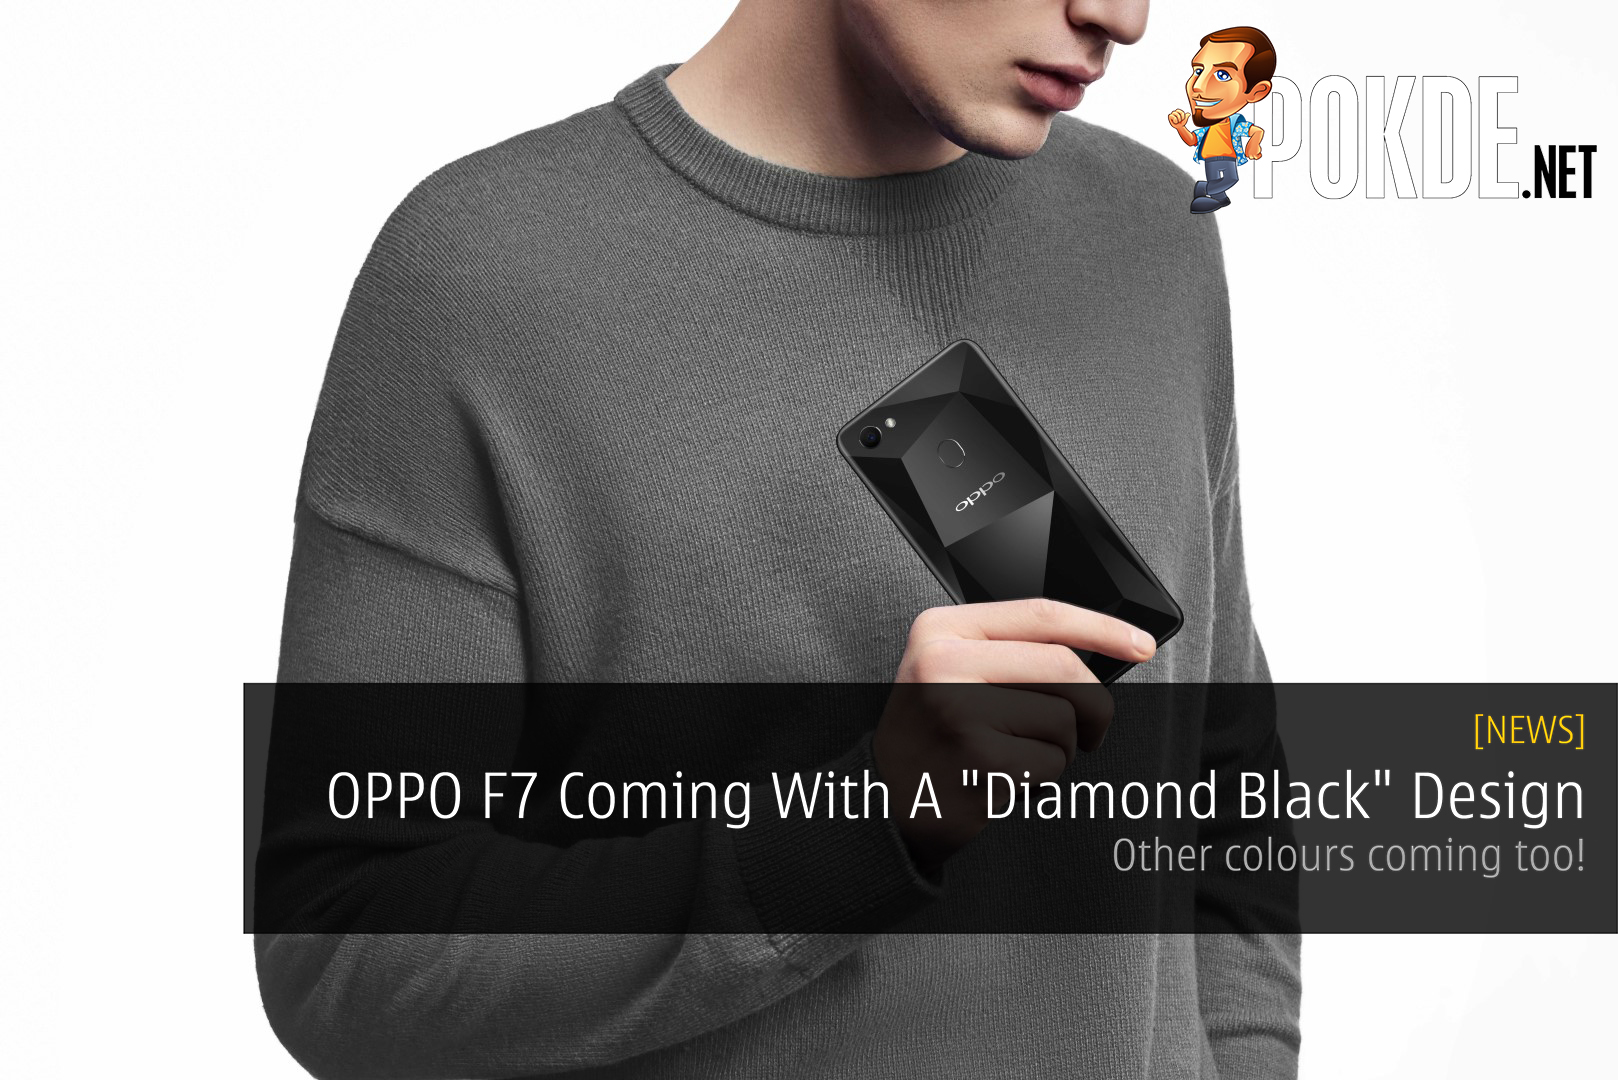 OPPO F7 Coming With A "Diamond Black" Design - Other colours coming too! 23